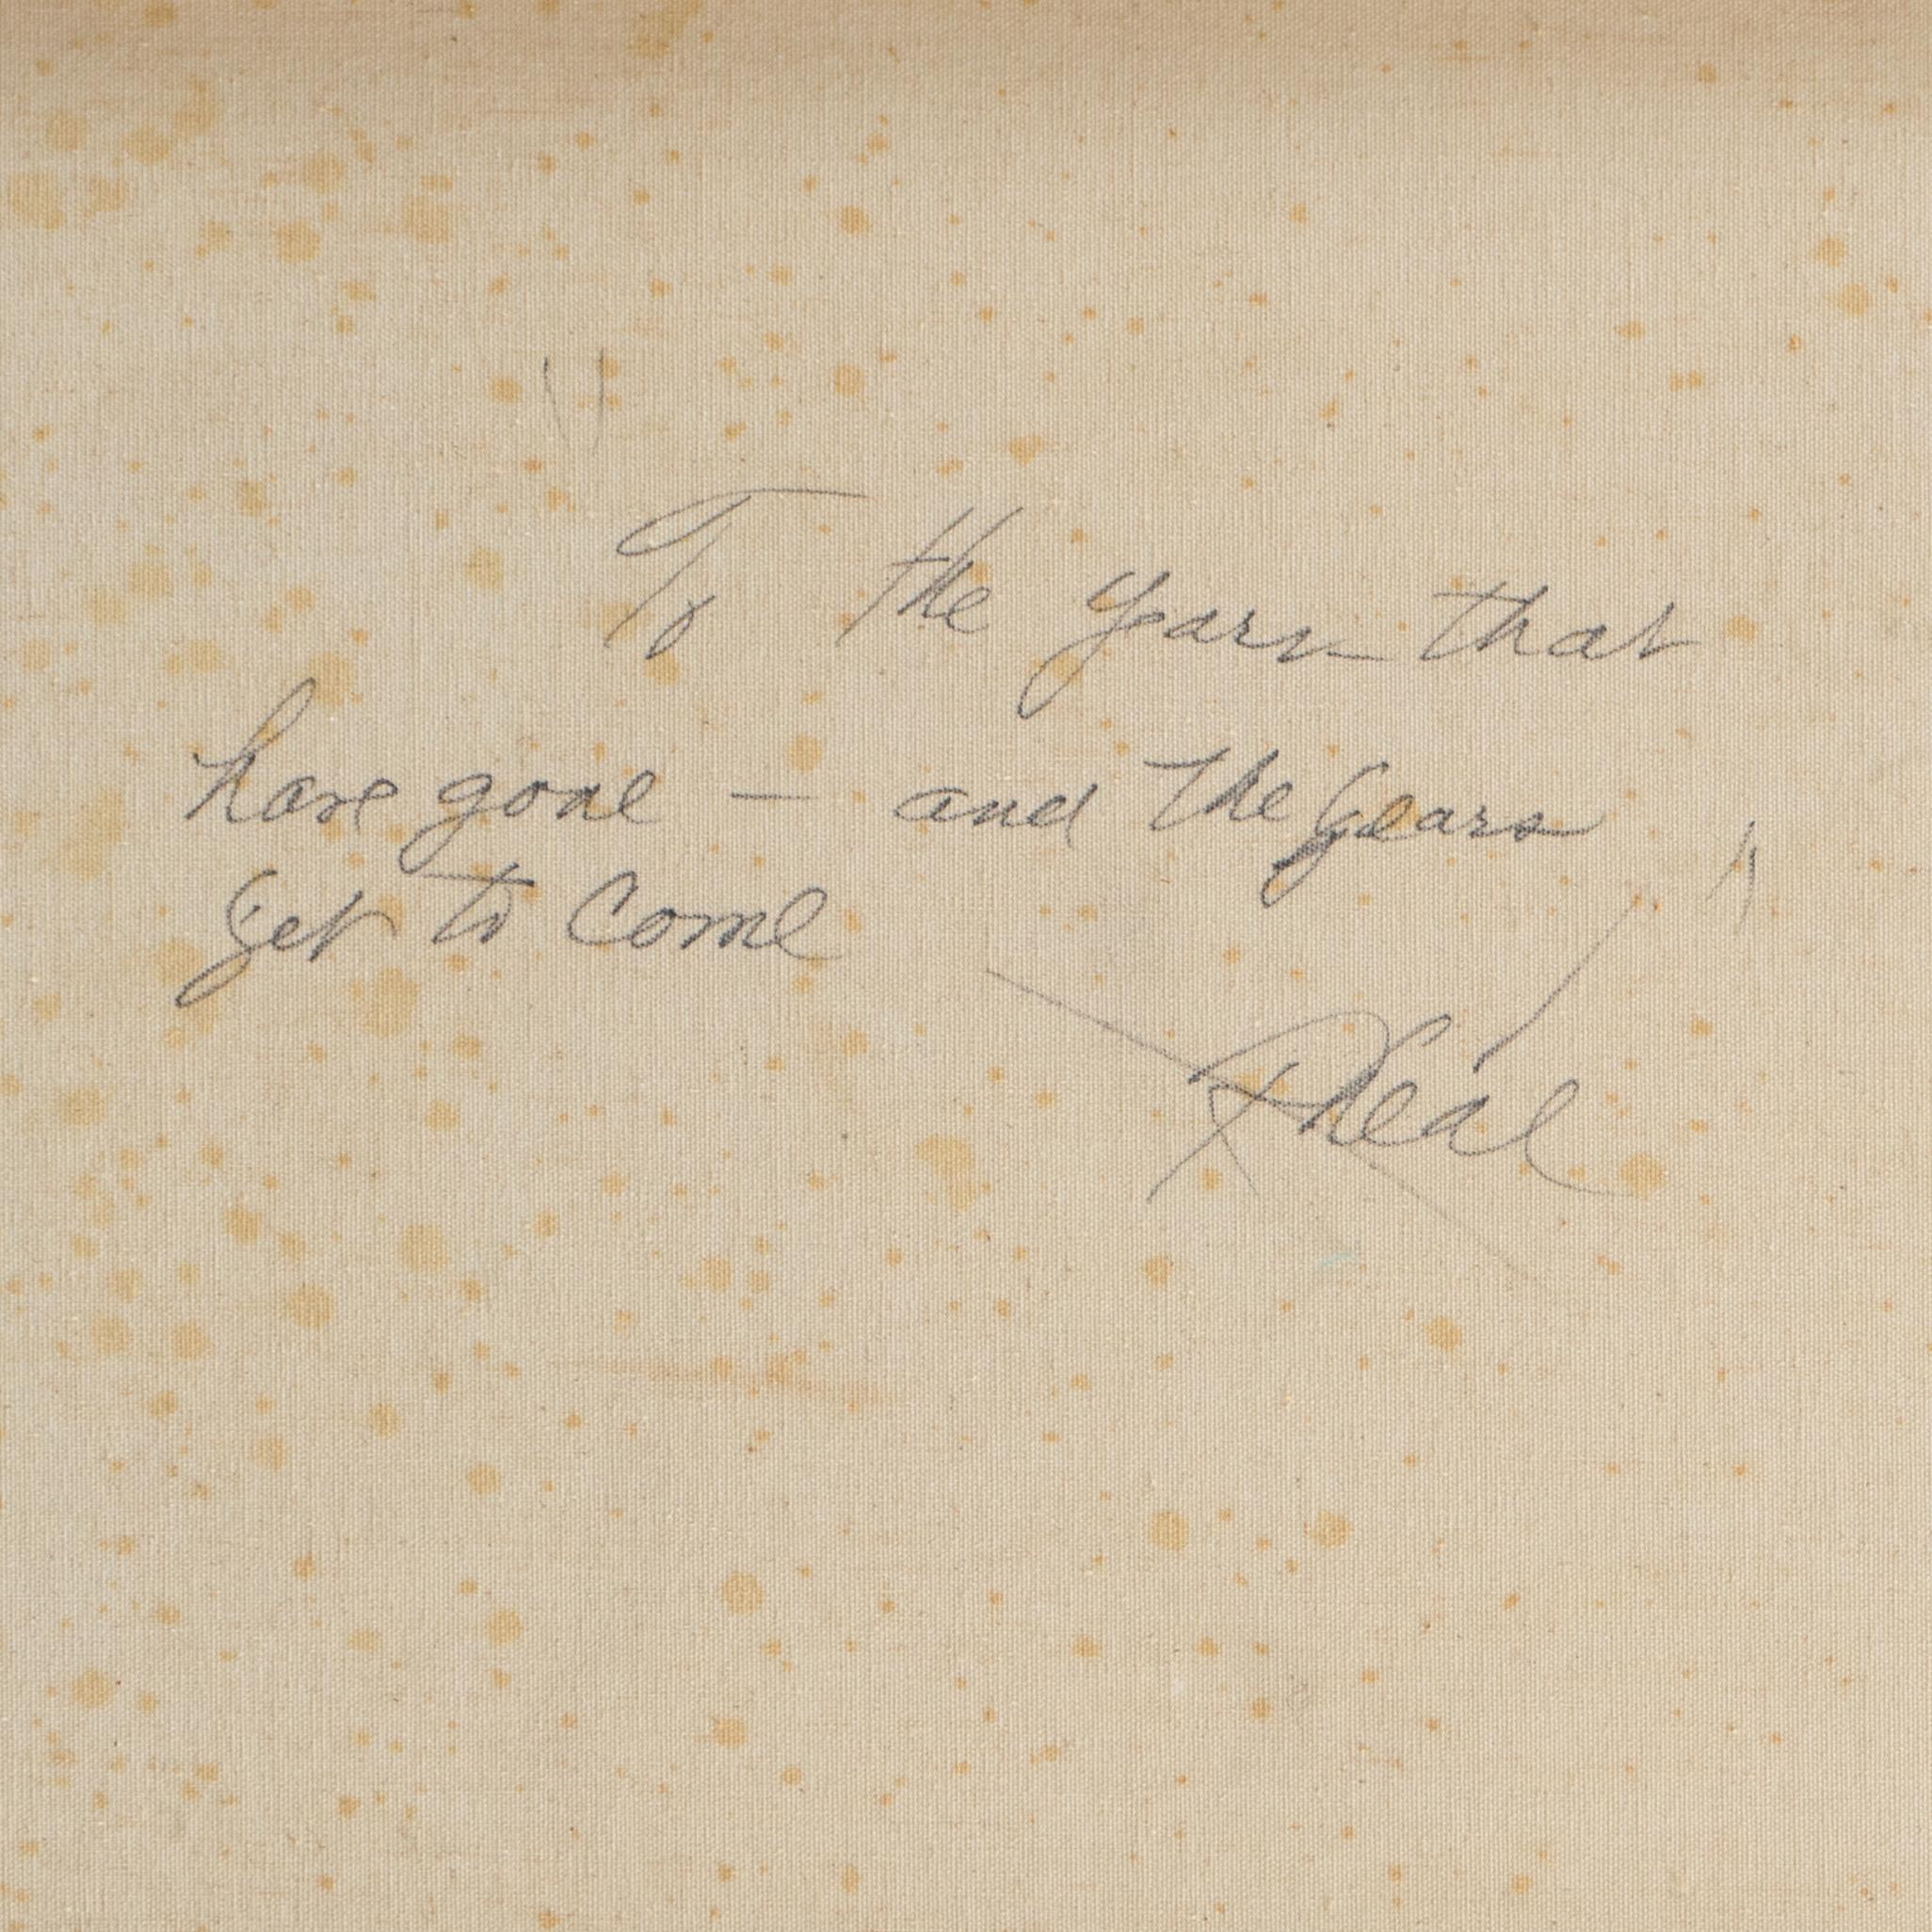 Signed lower right, 'Rhéal' (Irish, 20th Century) and dated ''75'.
Additionally signed verso and inscribed with dedication, 